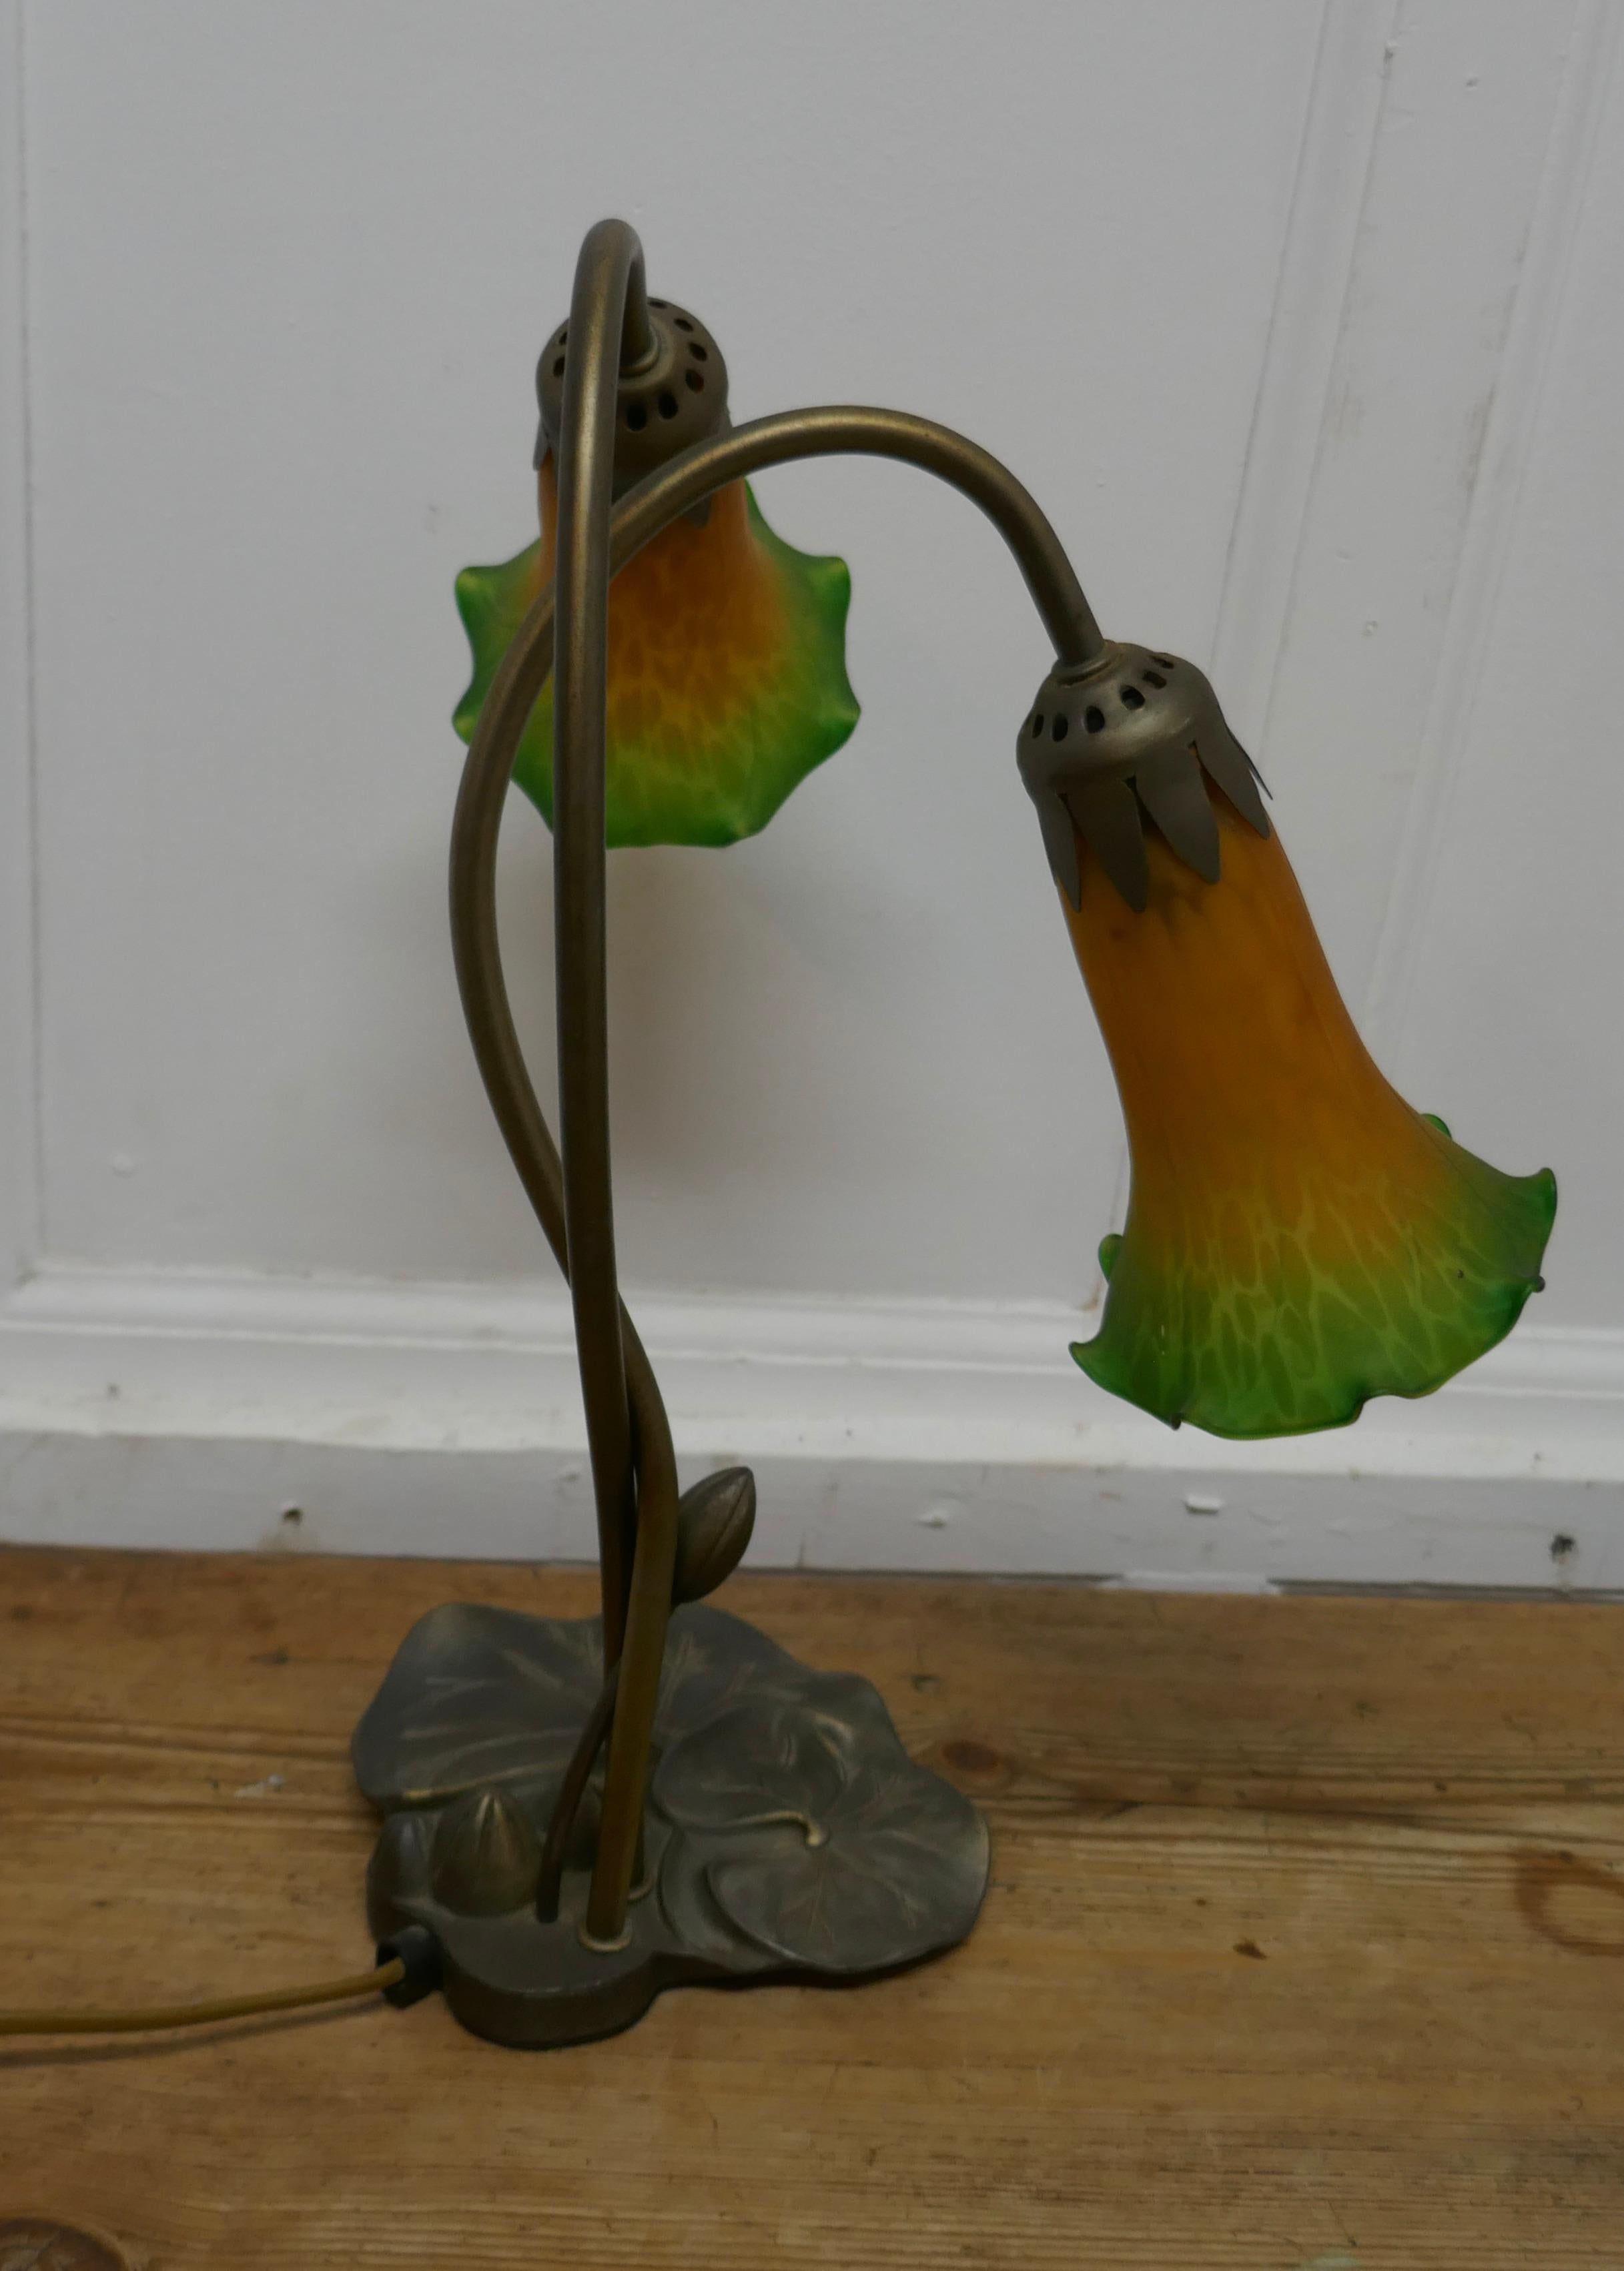 Lovely French Art Nouveau style Lilly pad lamp

A lovely piece, long flower like glass shades hang from the twining stems of the water Lilly, the lamp is in dark colored brass and the shades are in amber and green glass
In good used condition